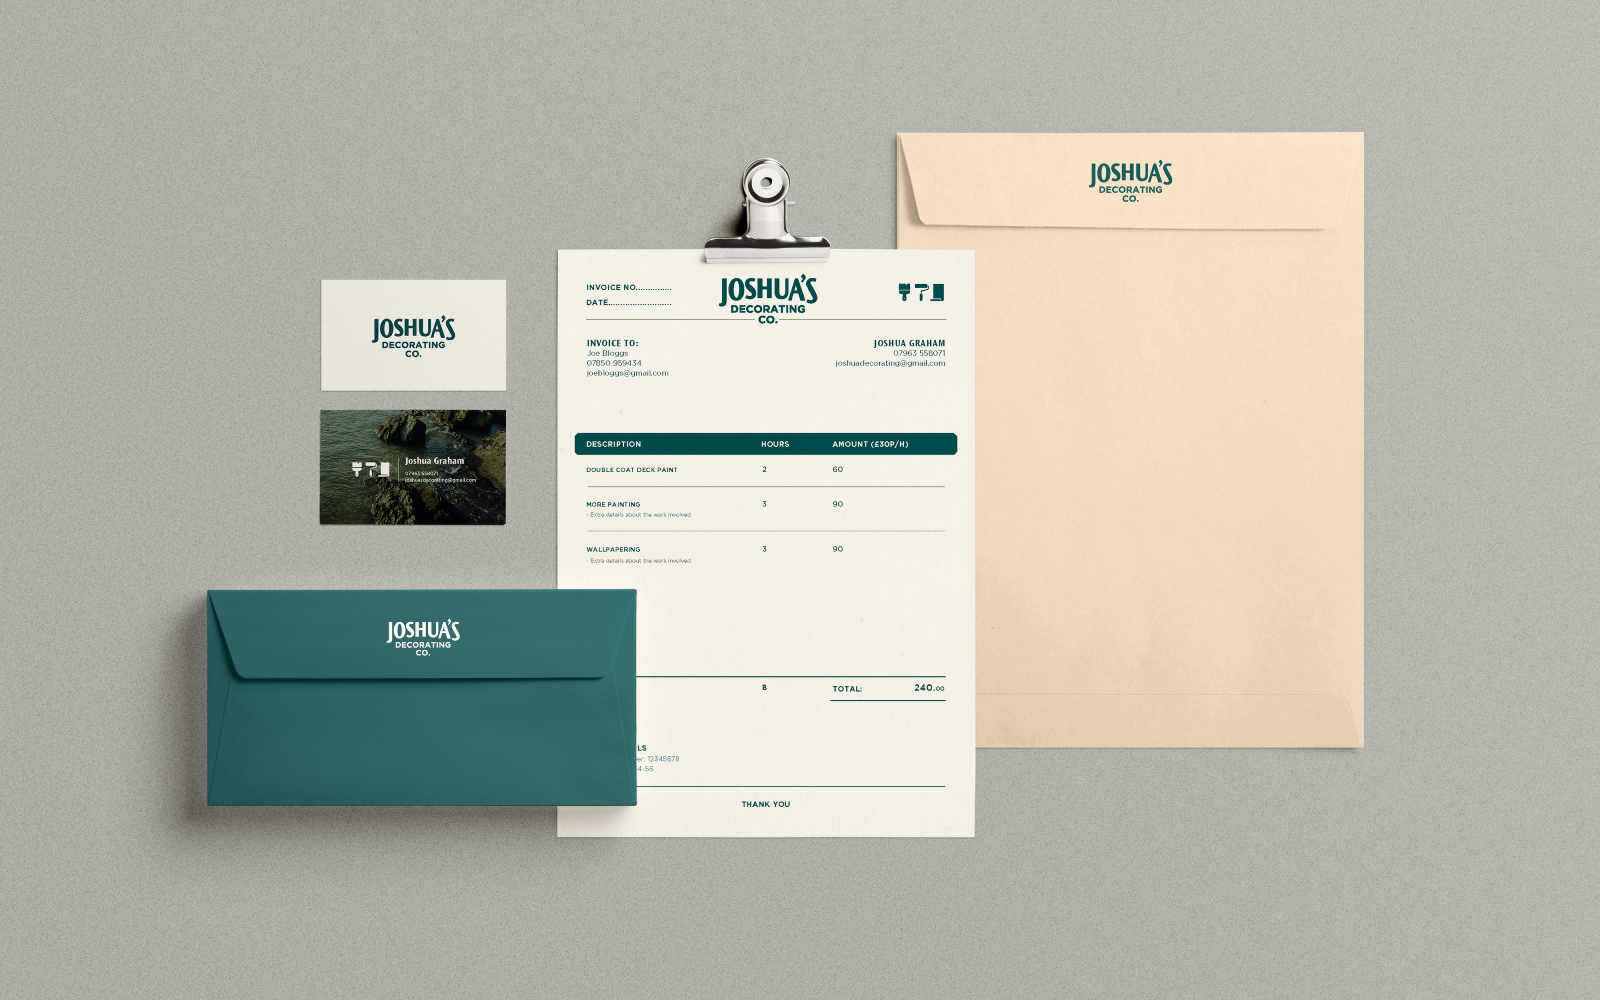 Range of printed materials designed for Joshua's Decorating Co, by Kozo Creative